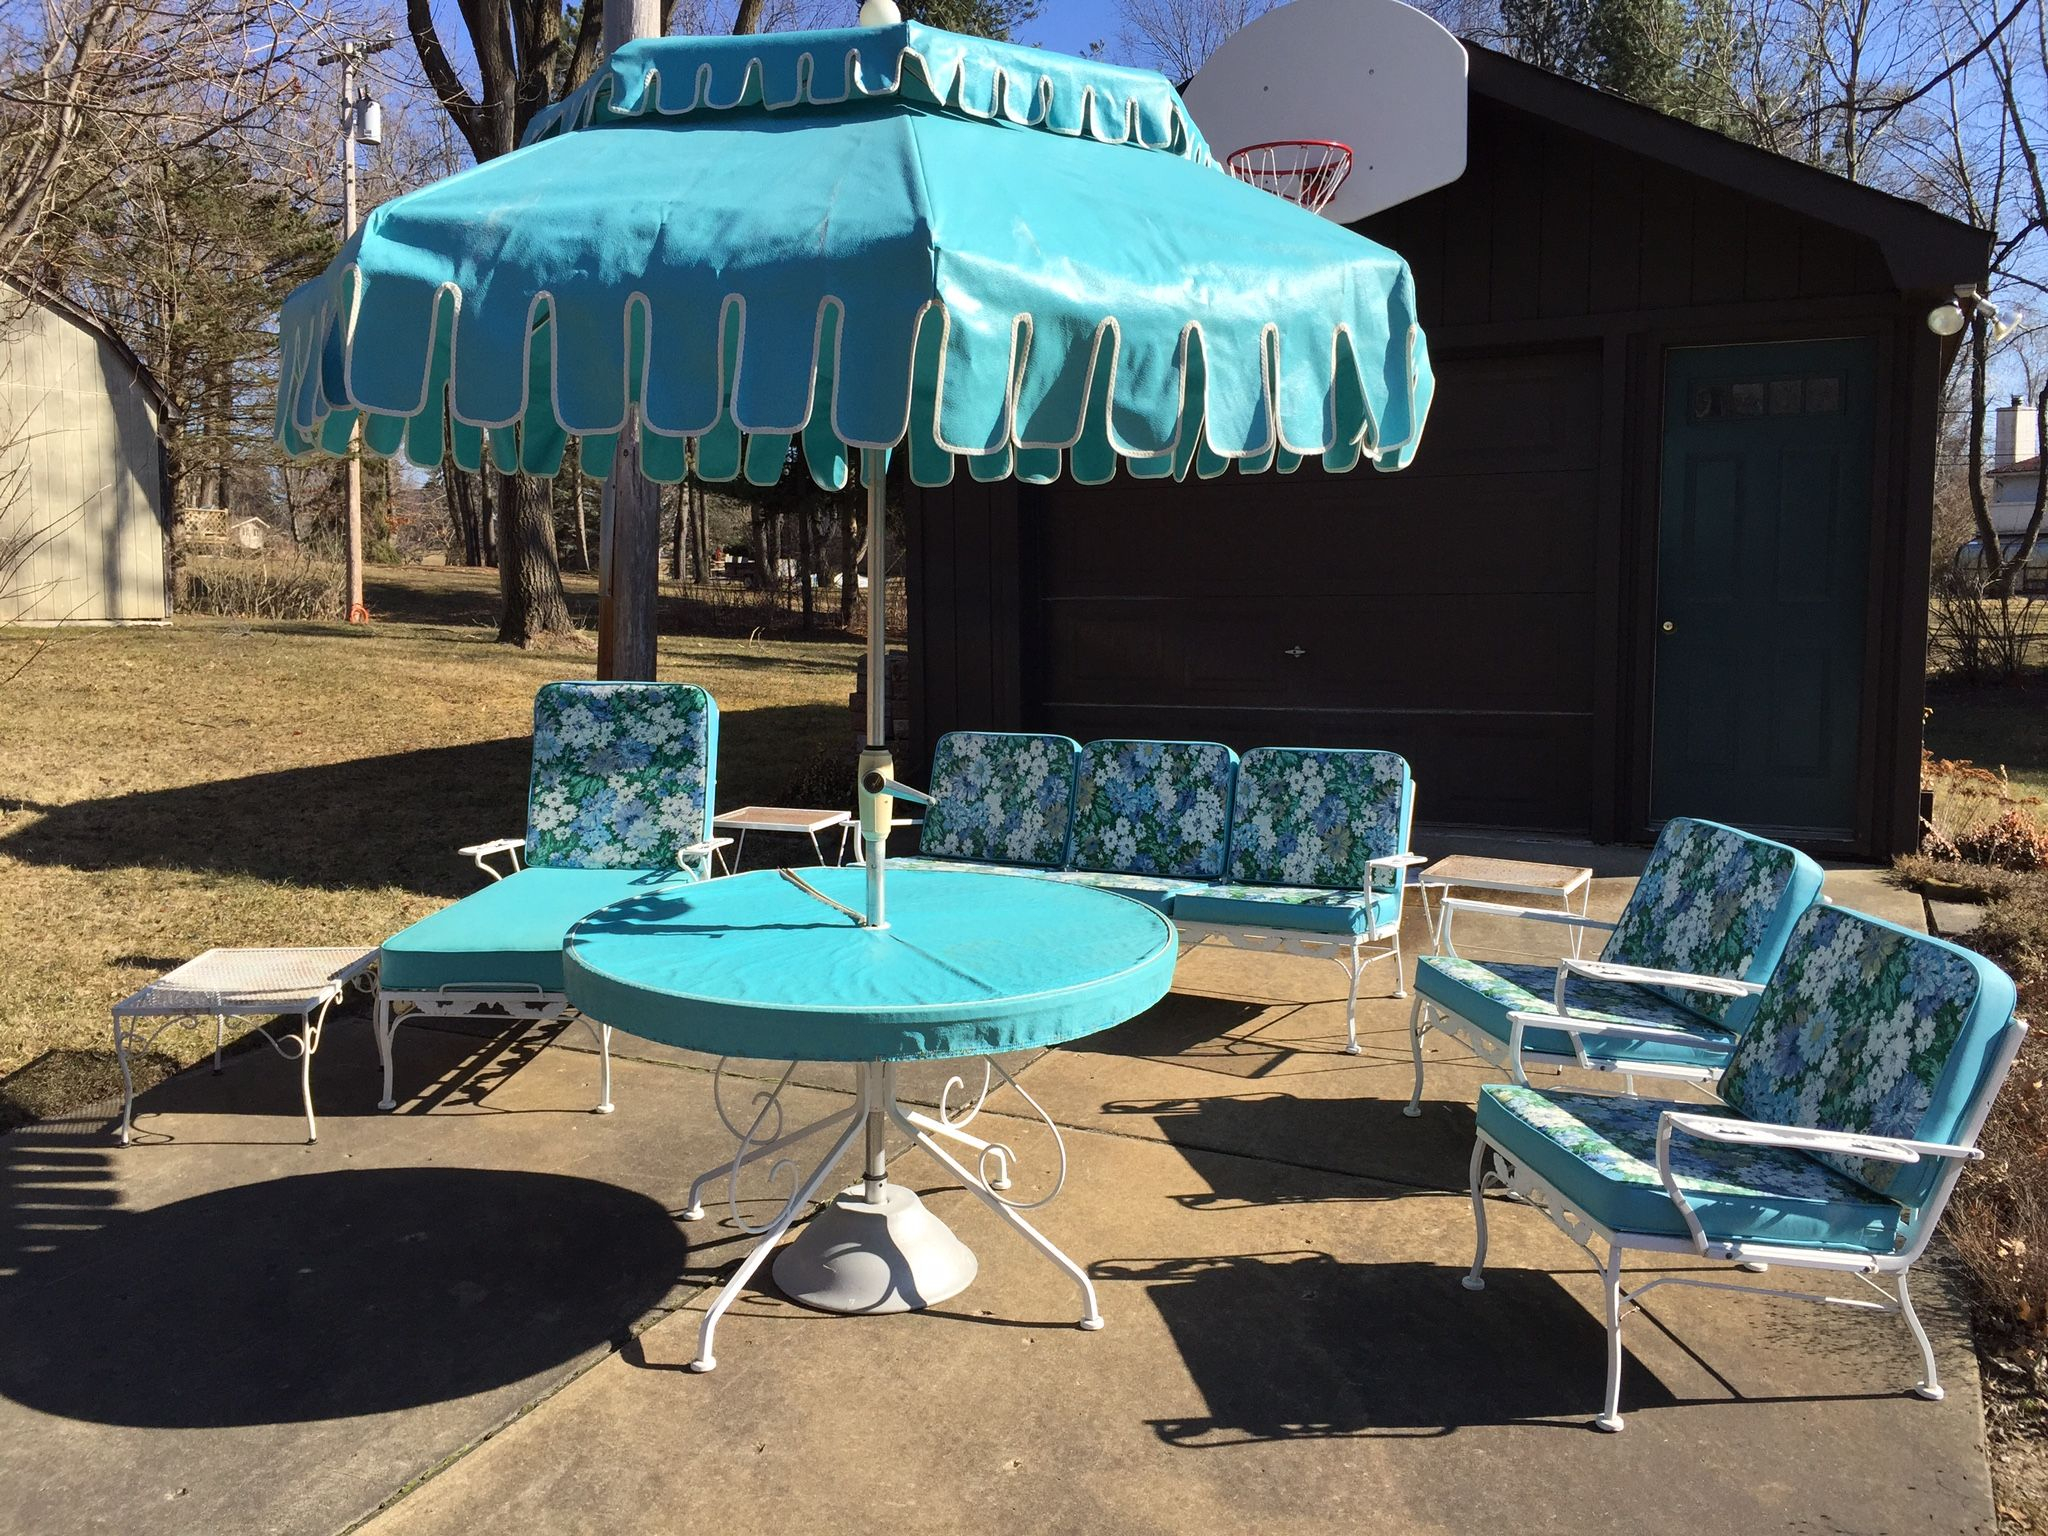 1960s Patio Set Stored In An Enclosed Porch For 50 Years within size 2048 X 1536